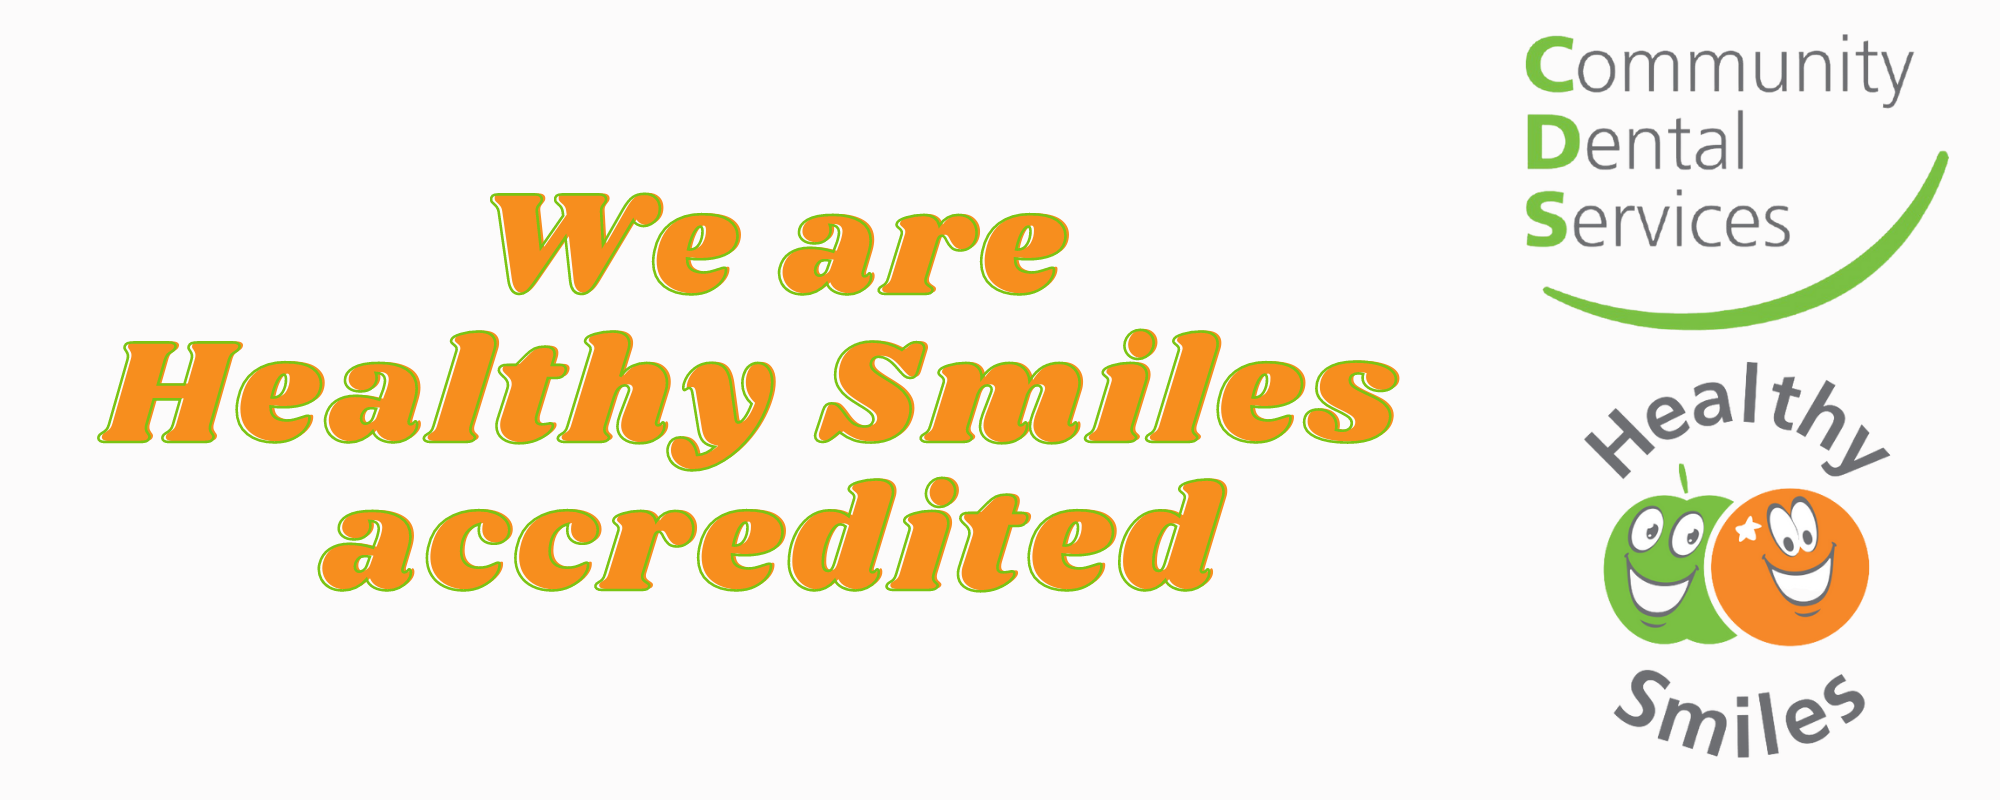 We are Healthy Smiles accredited.